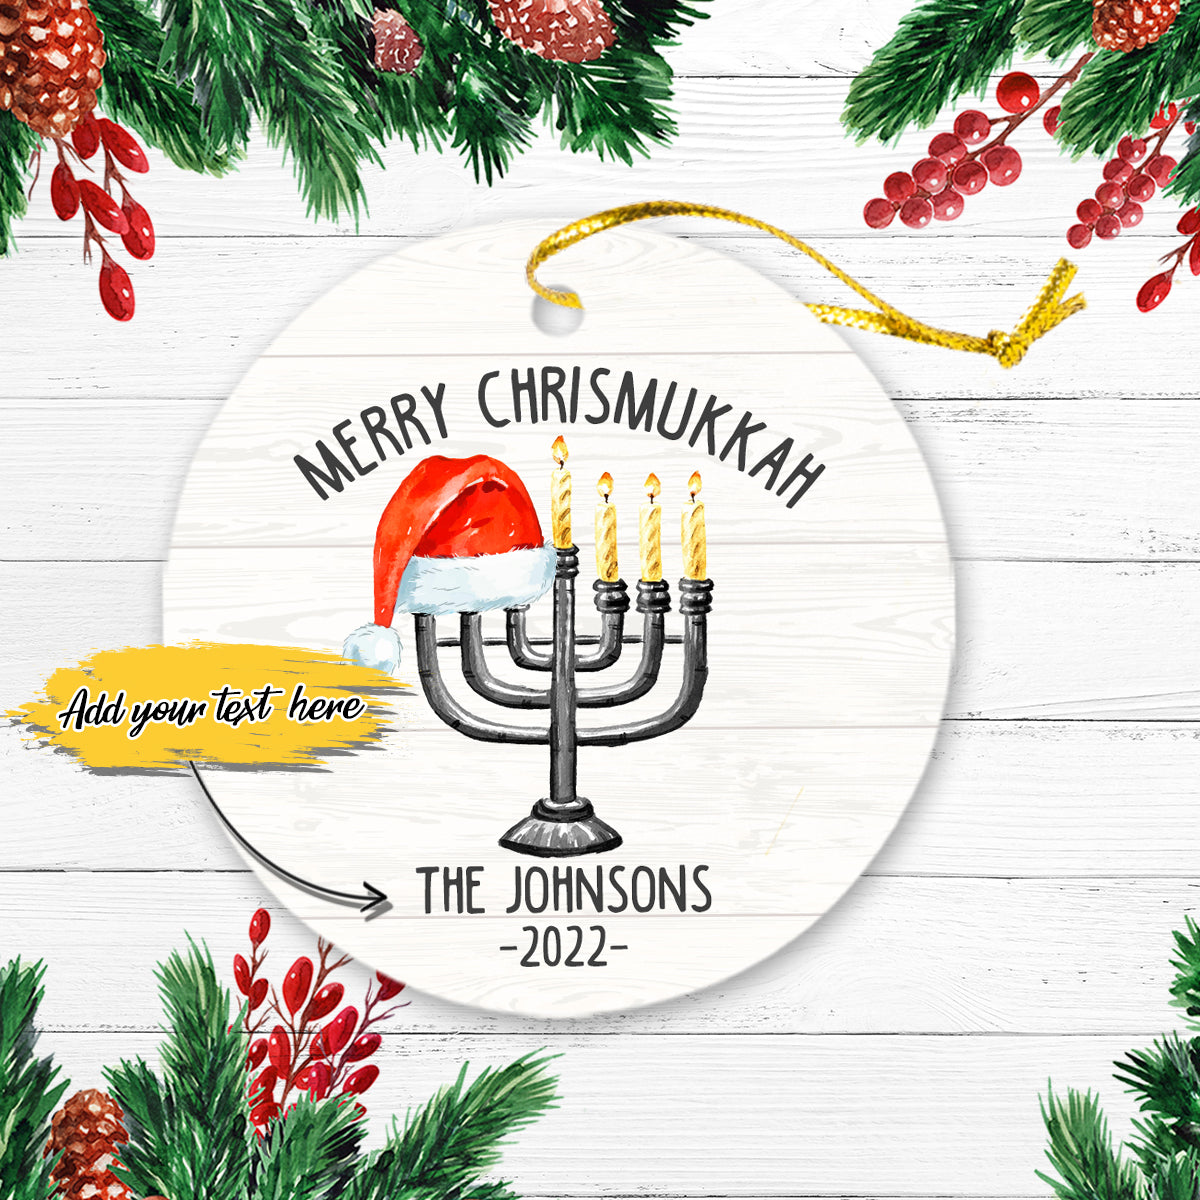 Merry Chrismukkah Christmas Hannukah Personalized Christmas Premium Ceramic Ornaments Sets for Christmas Tree